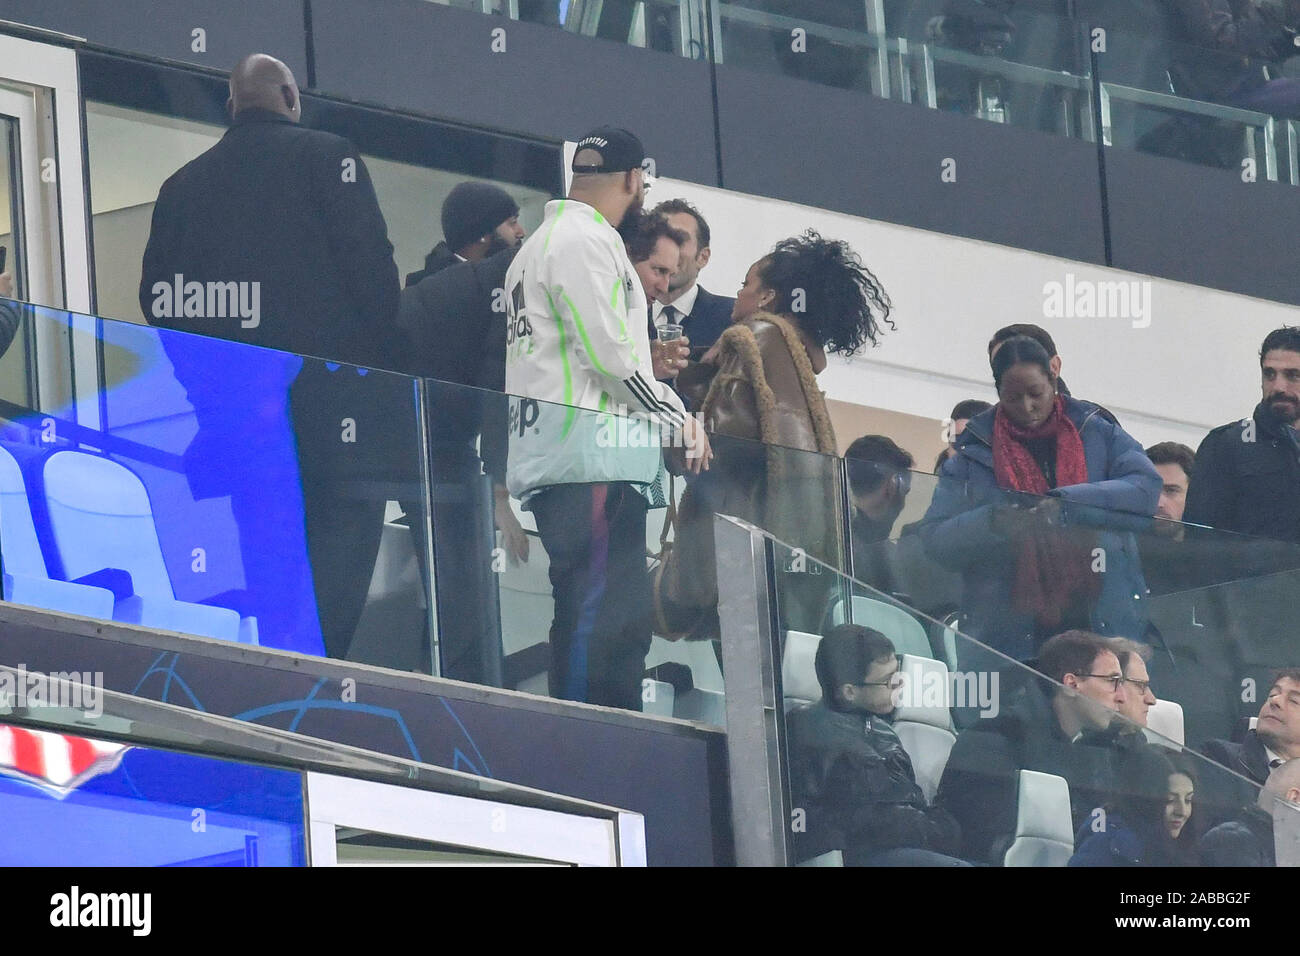 Turin, Italy. 26th Nov, 2019. Rihanna at the Allianz Stadium to see Juventus - Atletico Madrid In the Photo: Robyn Rihanna Fenty Credit: Independent Photo Agency/Alamy Live News Stock Photo